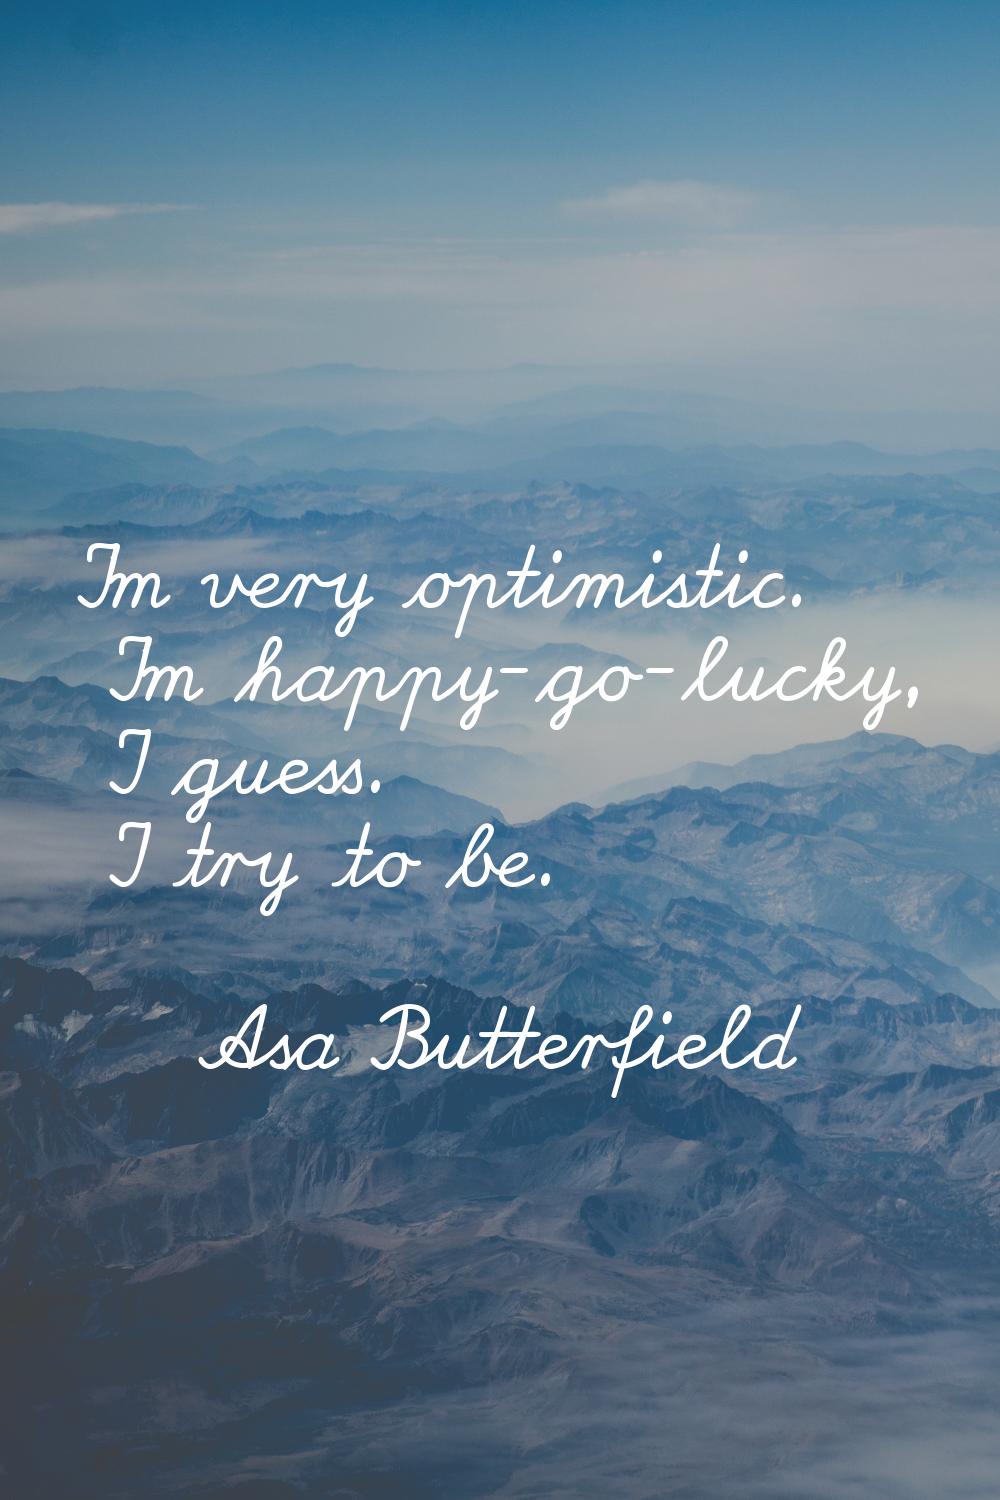 I'm very optimistic. I'm happy-go-lucky, I guess. I try to be.